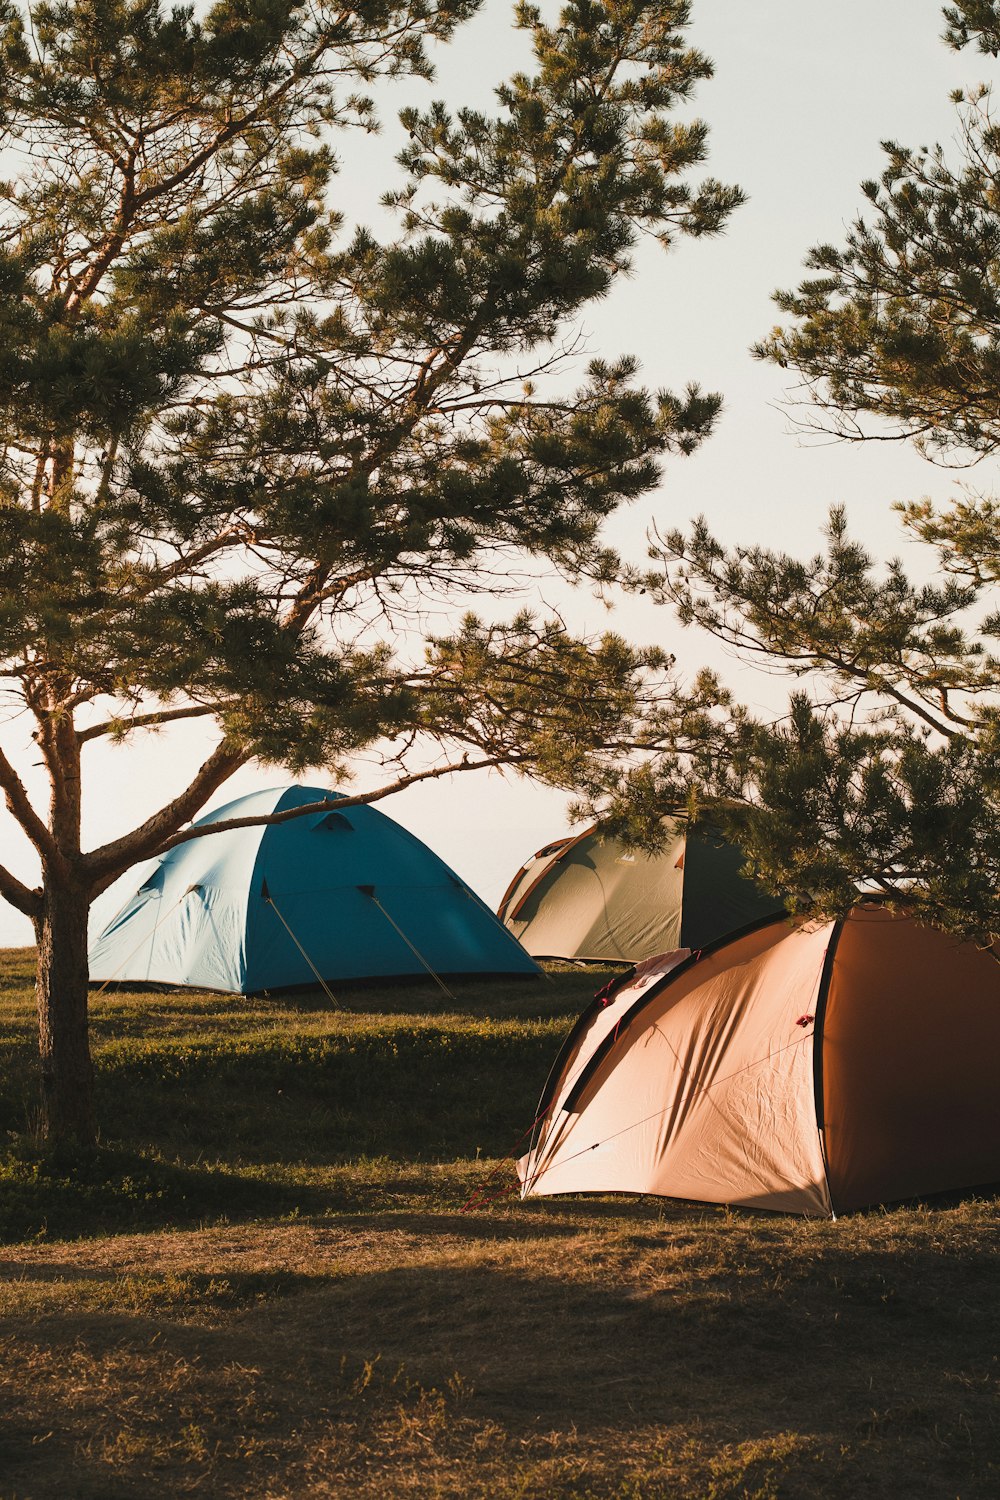 Camping Site Pictures | Download Free Images on Unsplash